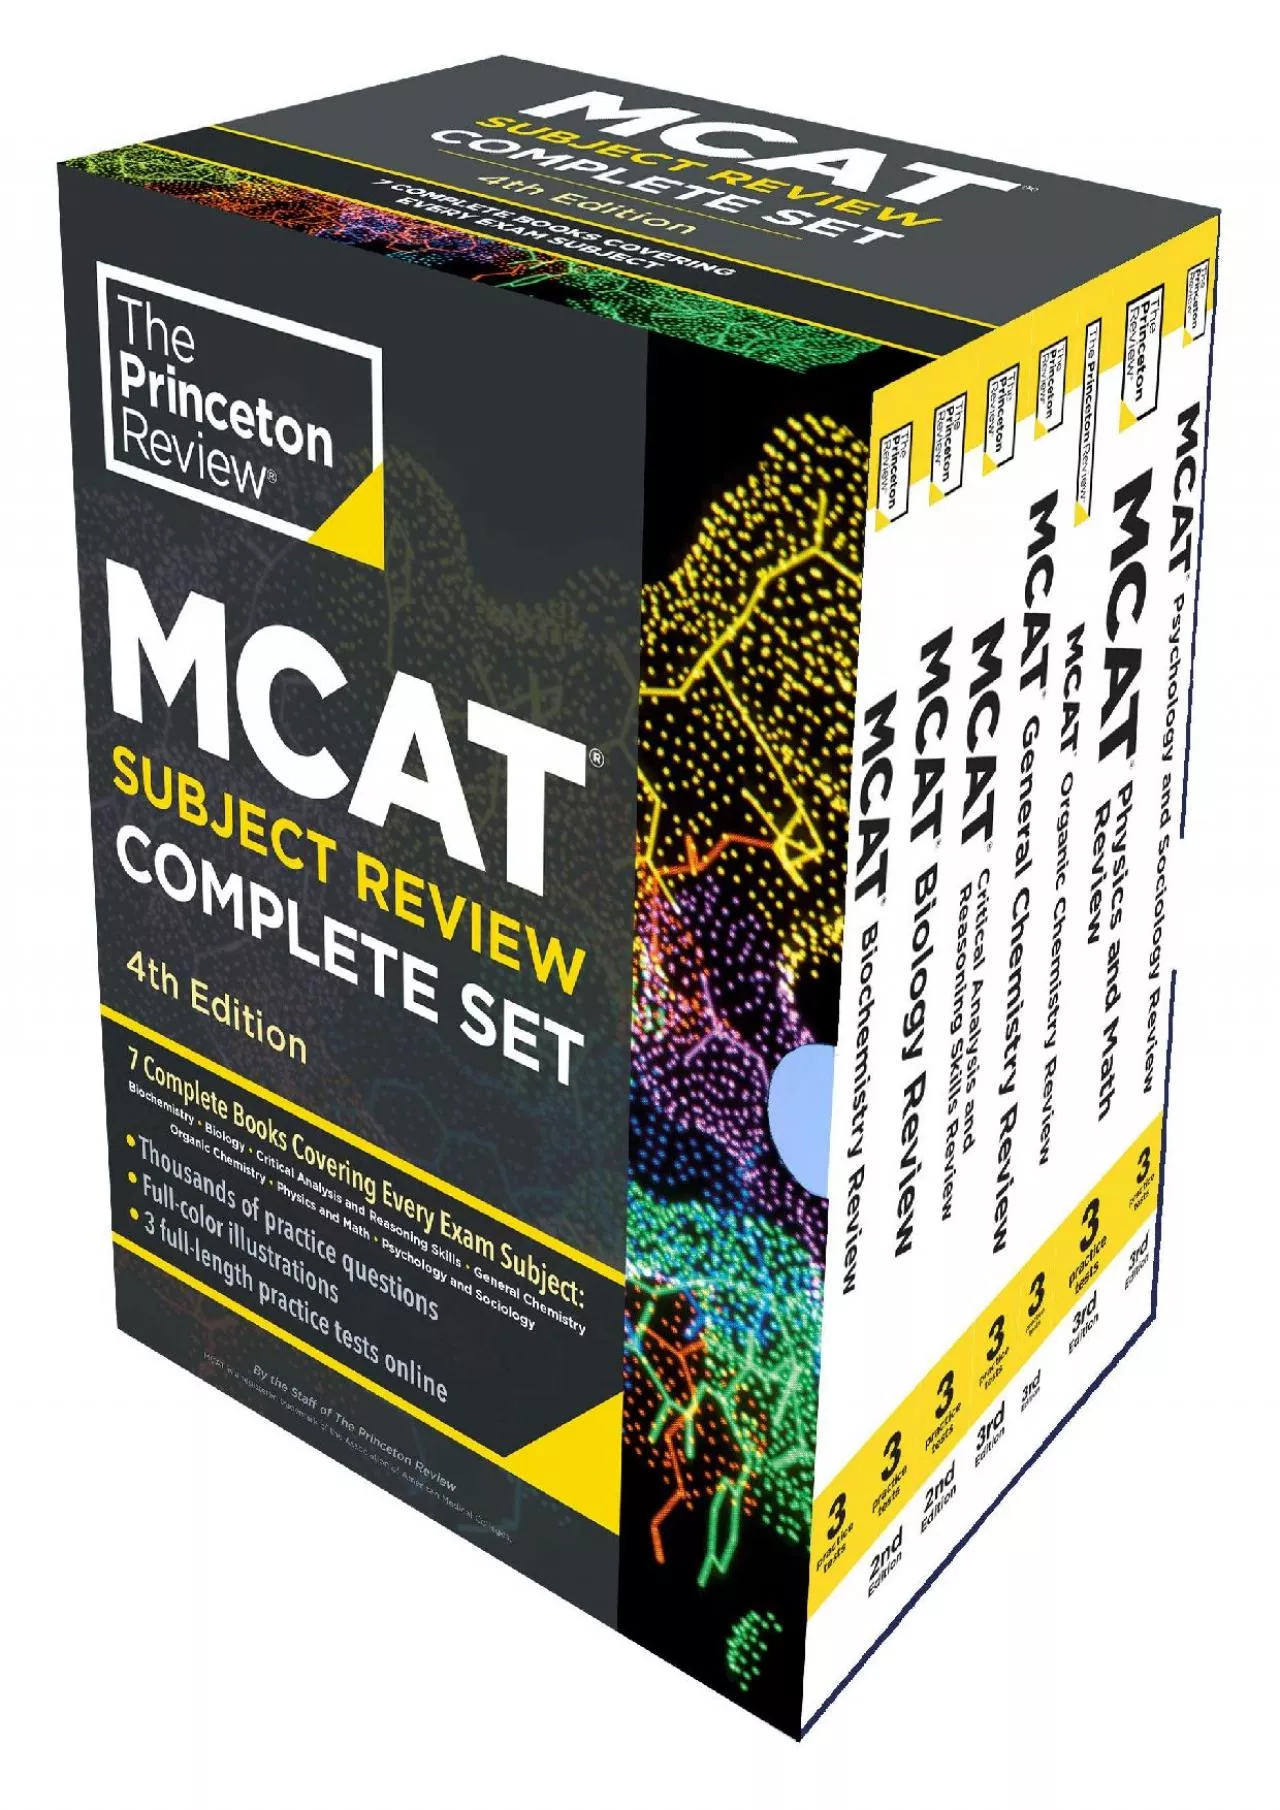 [EBOOK] Princeton Review MCAT Subject Review Complete Box Set, 4th Edition: 7 Complete